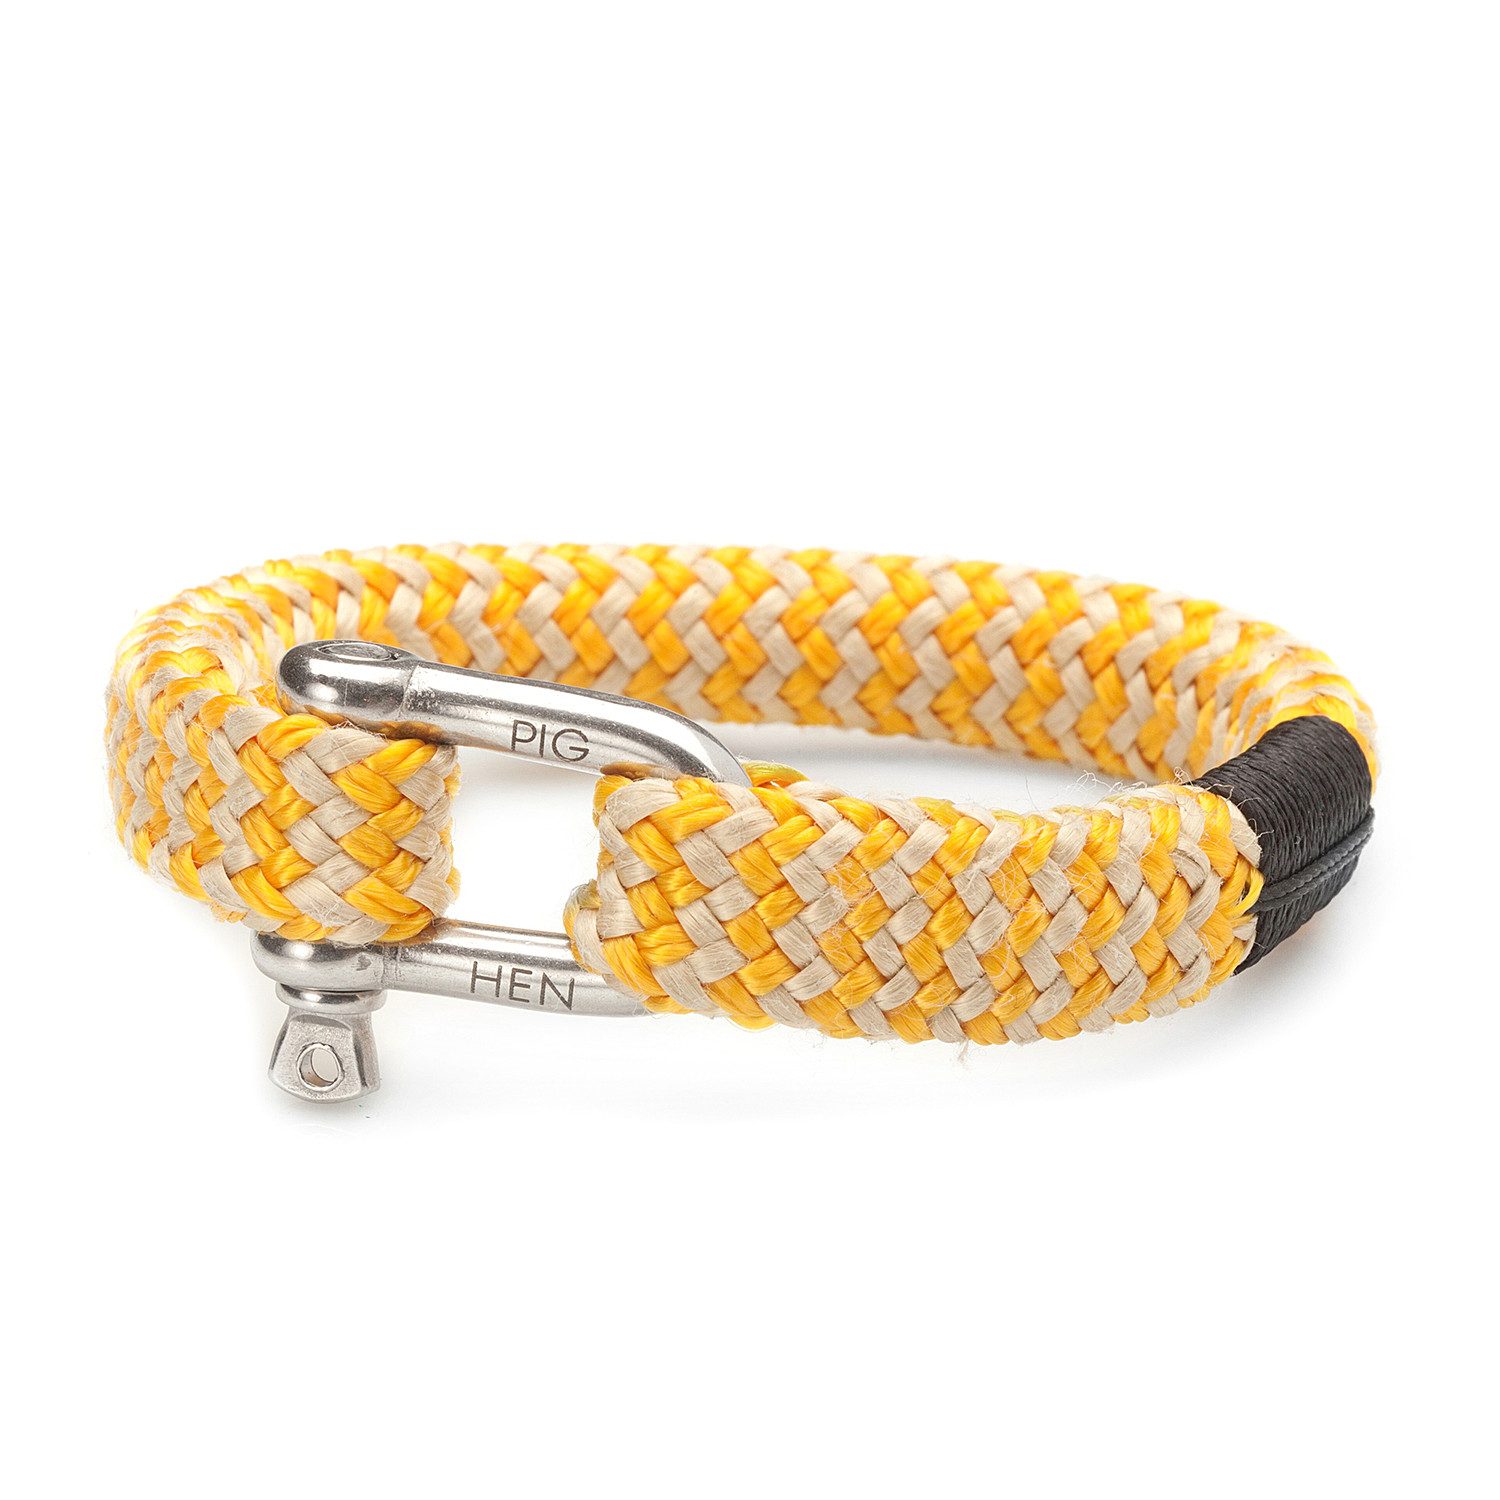 Bombay Barry // Yellow + Gold (Large) - Pig & Hen PERMANENT STORE